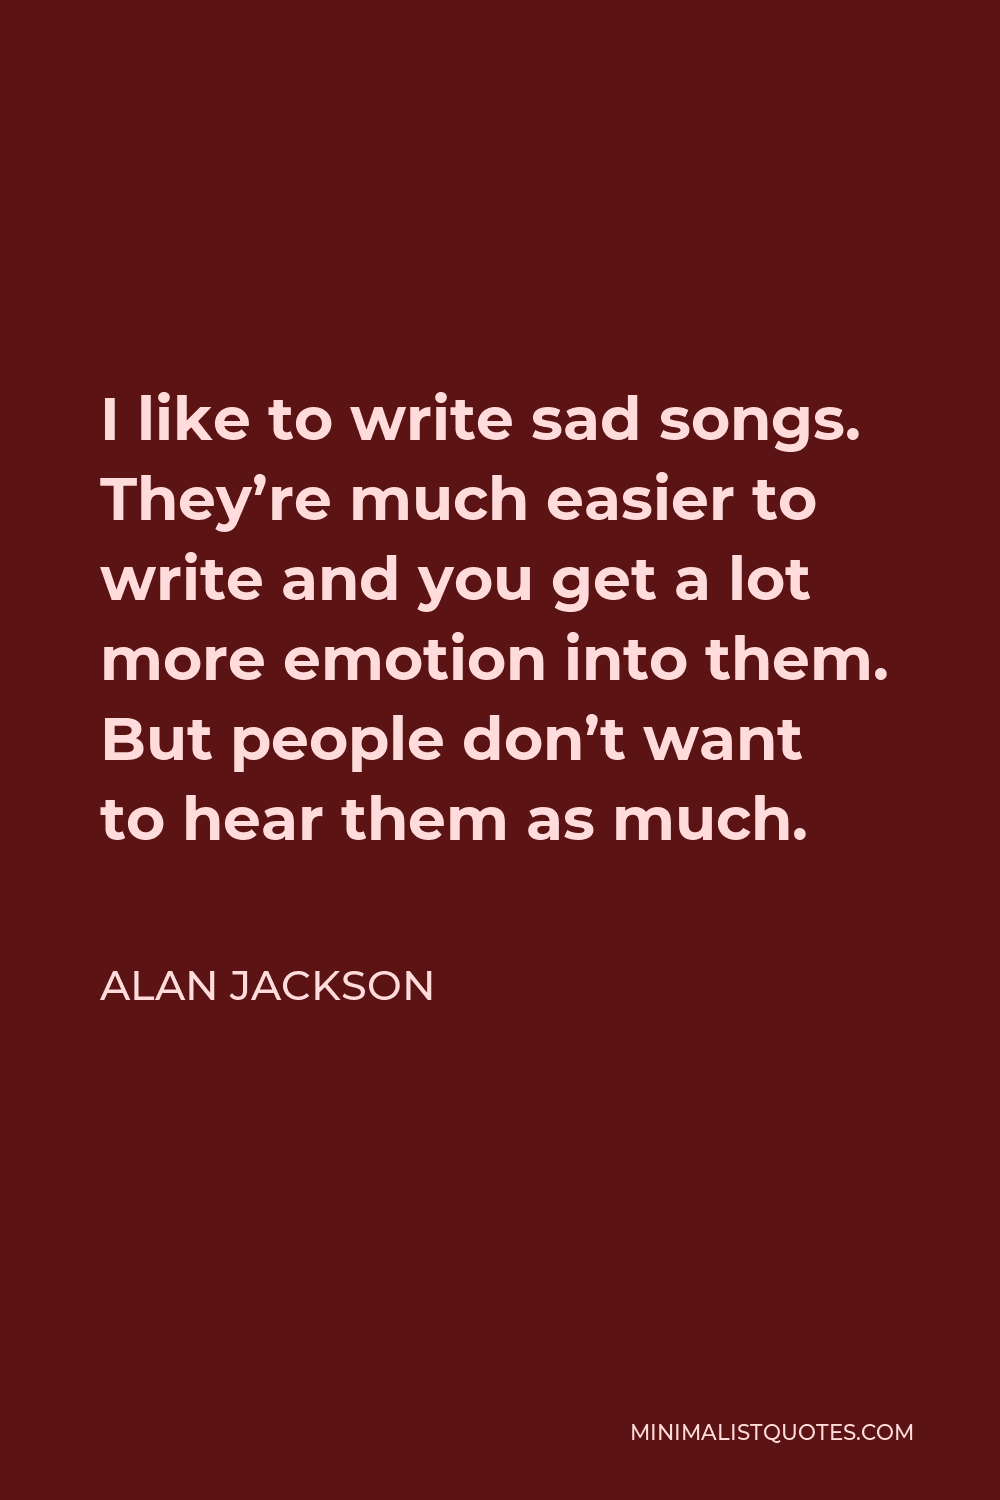 Alan Jackson Quote - I like to write sad songs. They’re much easier to write and you get a lot more emotion into them. But people don’t want to hear them as much.